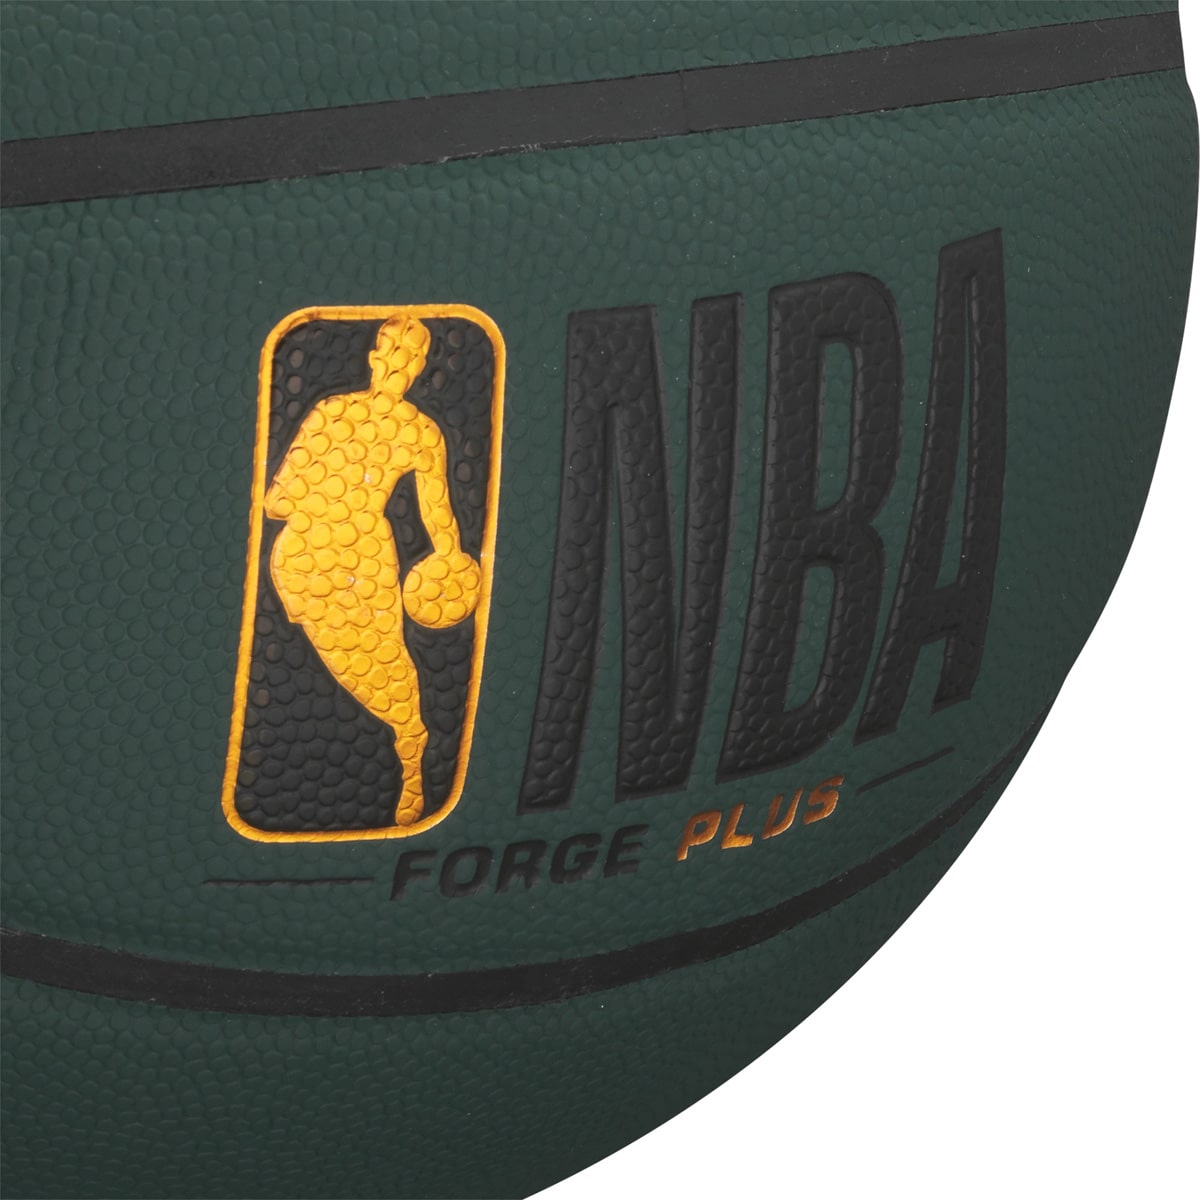 WTB8103EC_19_7_07_NBA_Forge_Plus_Official_ForestGreen.png.high-res-min